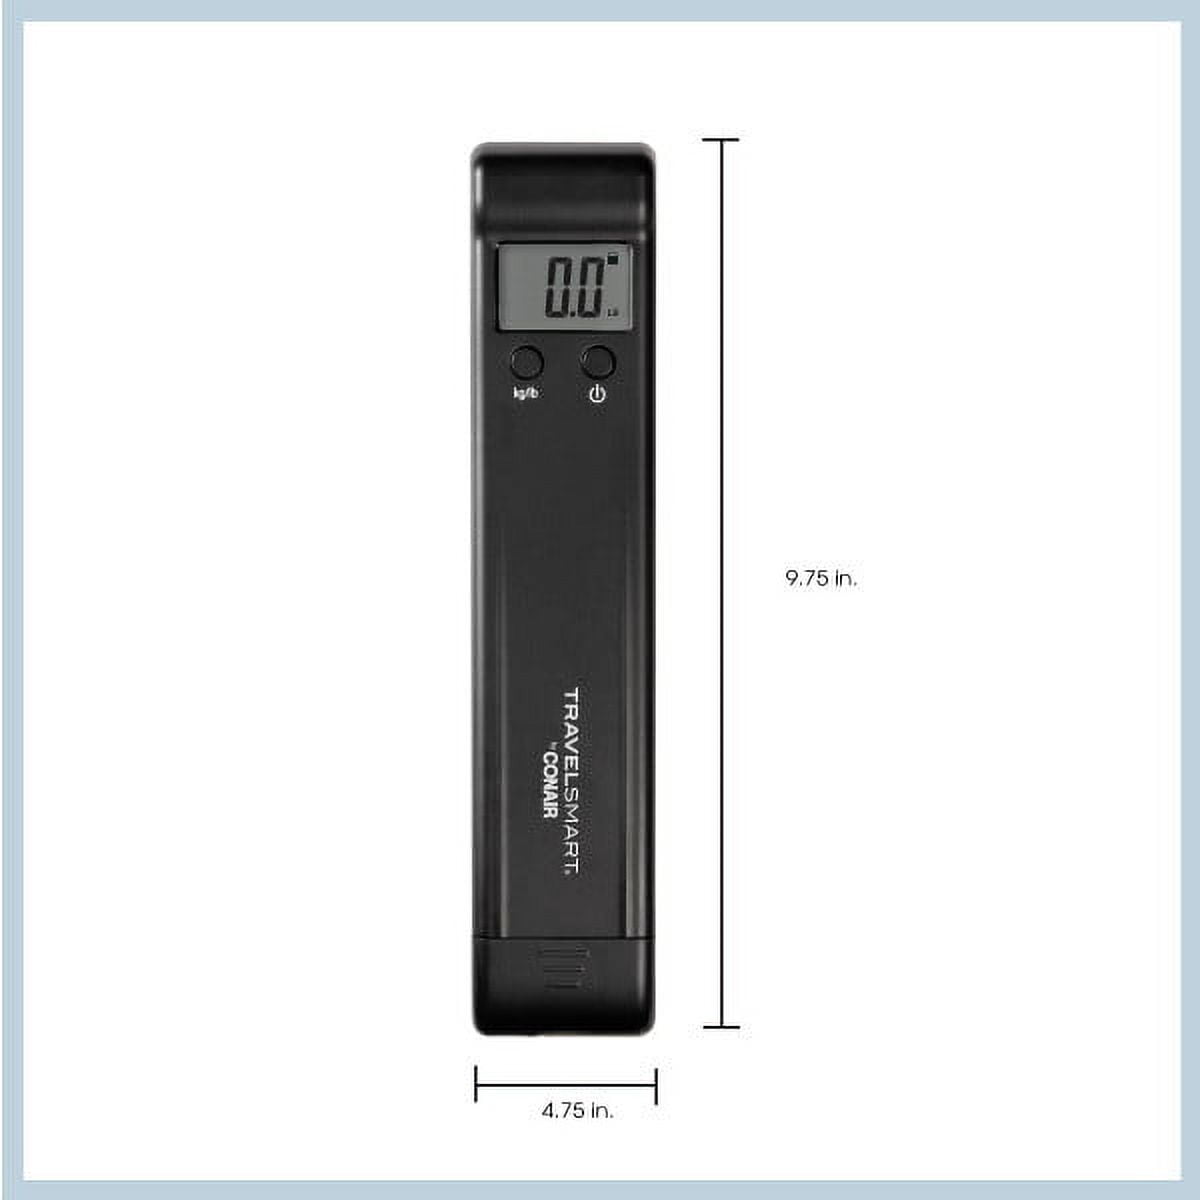 Travel Smart By Conair Digital Luggage Scale : Target